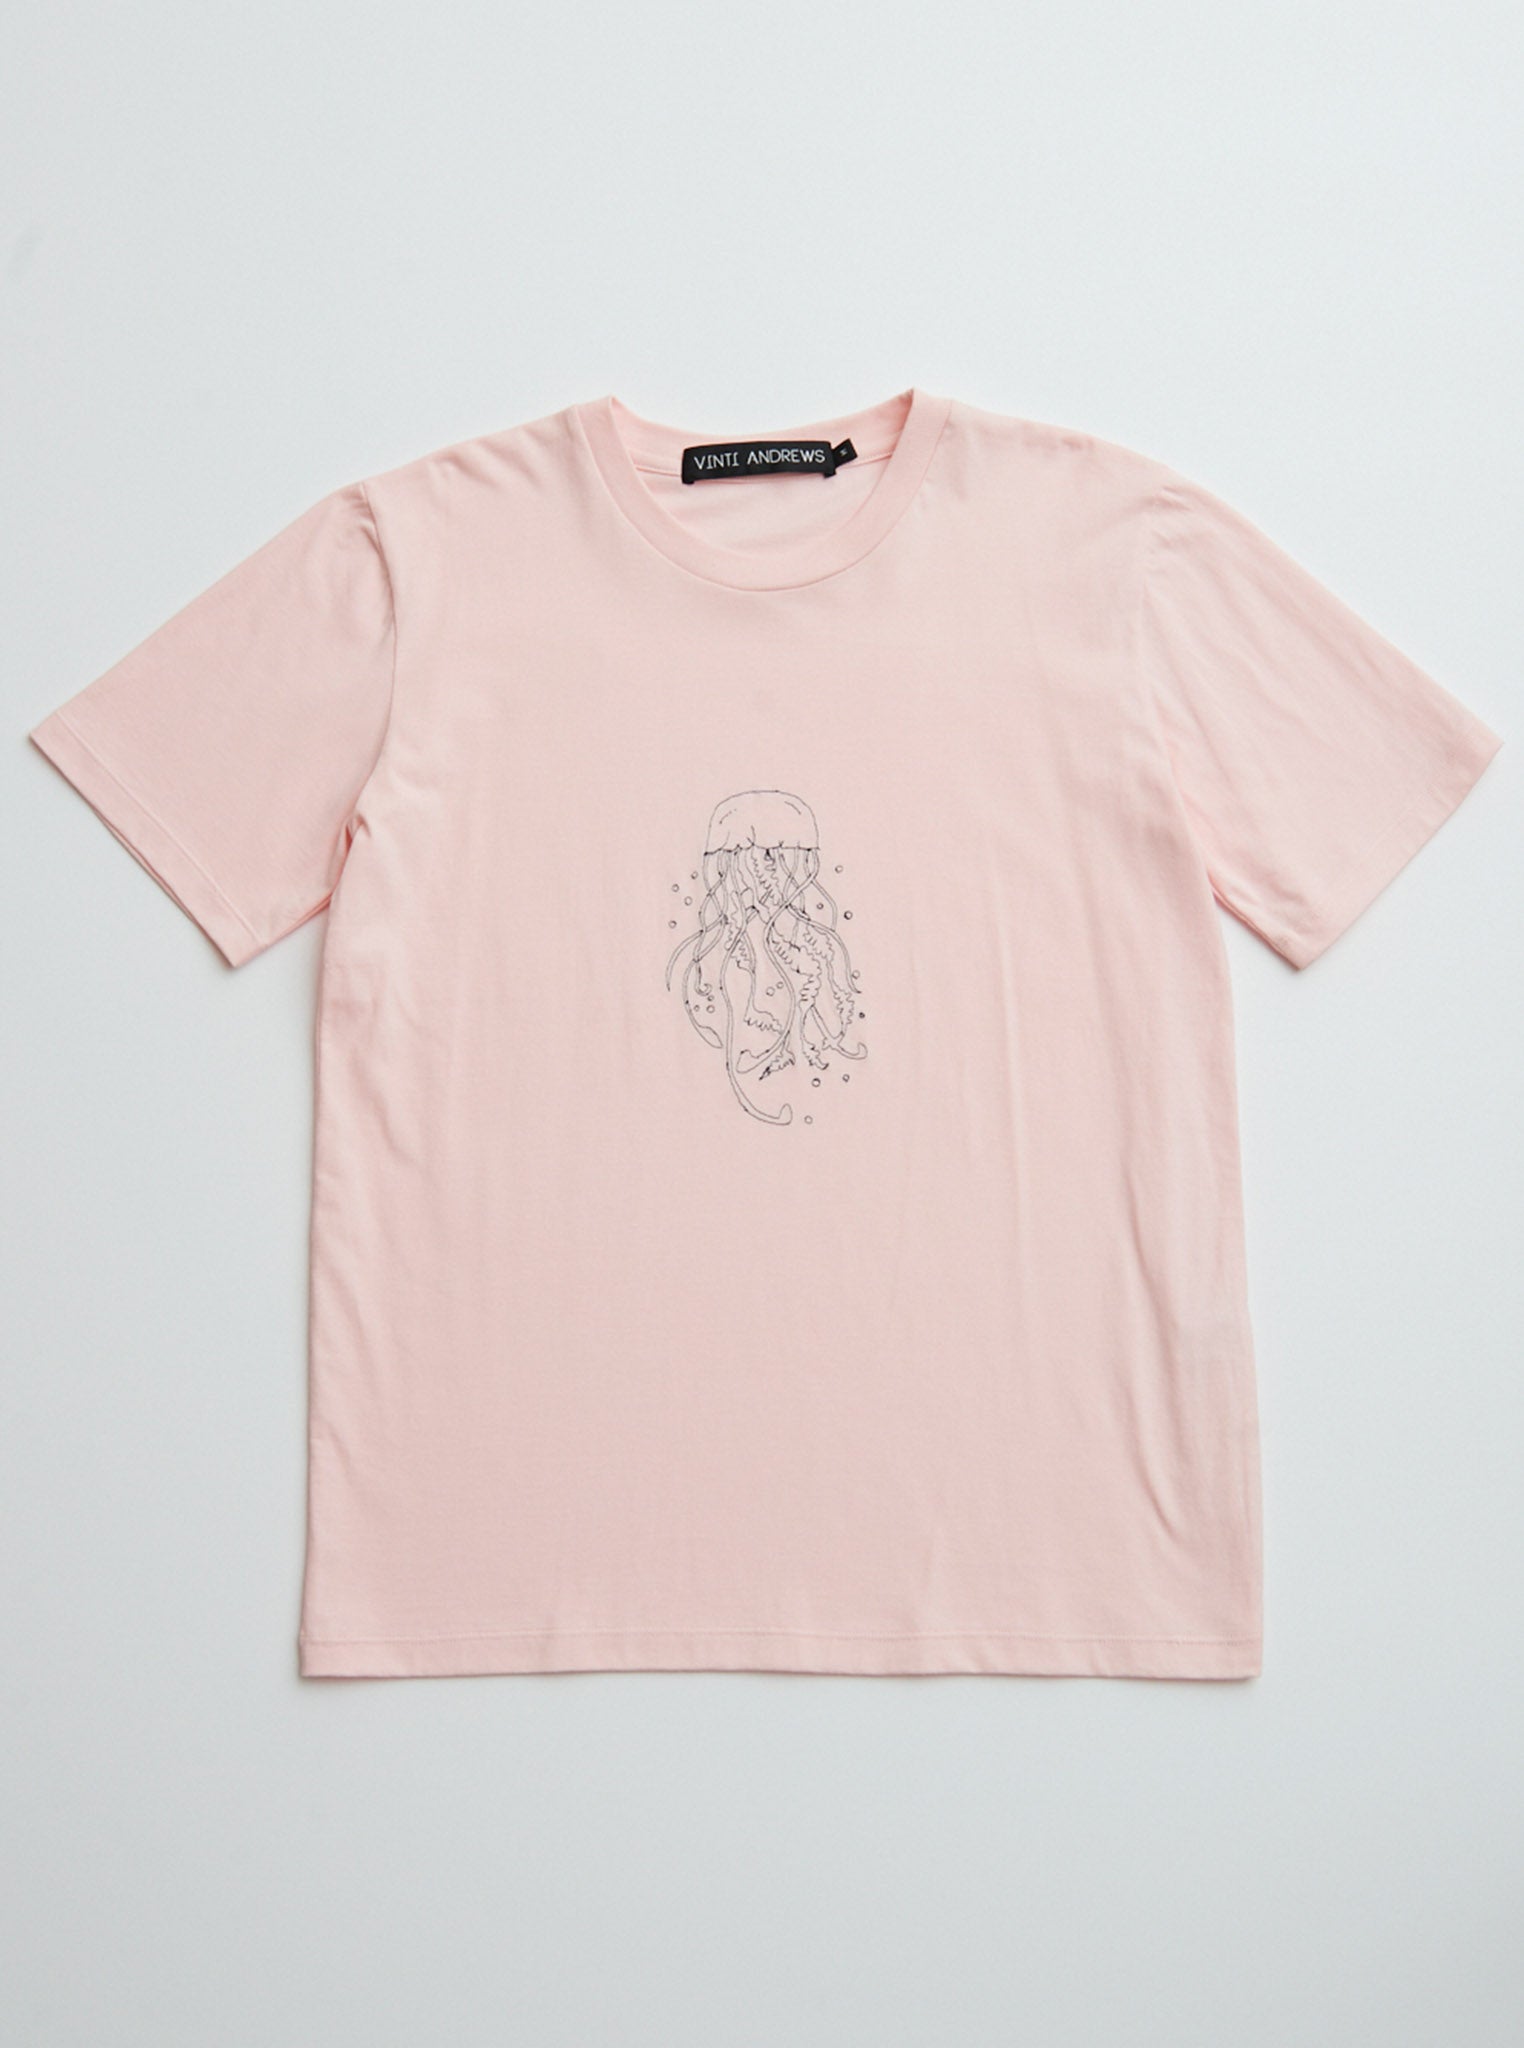 Vinti Andrews Embroidery Jellyfish T-Shirt Pink